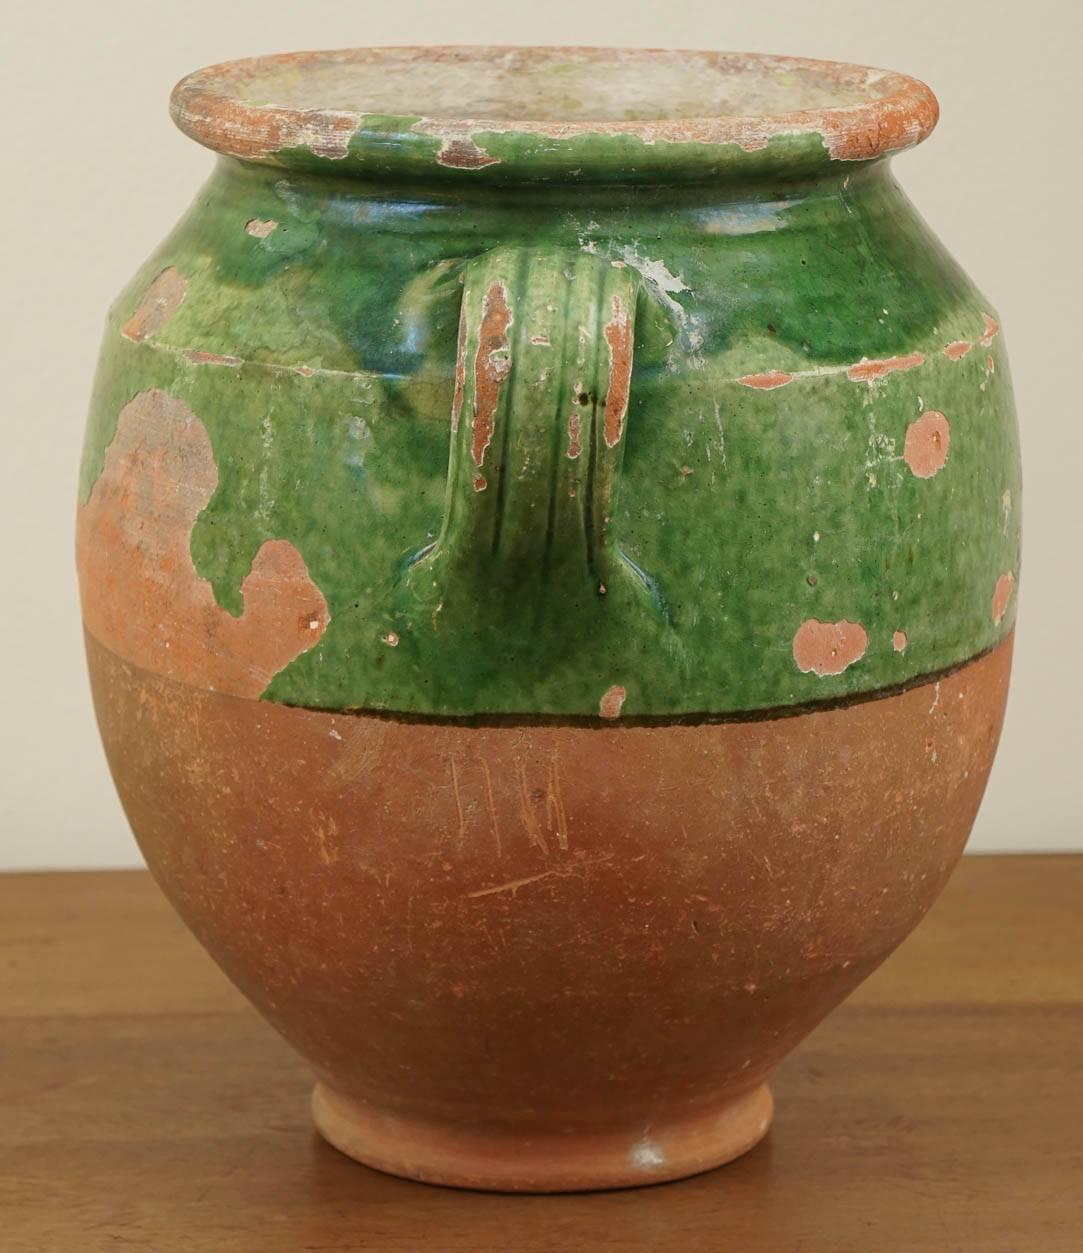 These pieces of pottery were originally used to store confit jars in France. It is more common to find mustard glazed jars but the green ones are more difficult to find. We currently have three green ones and here is one of them. Put a glass vase